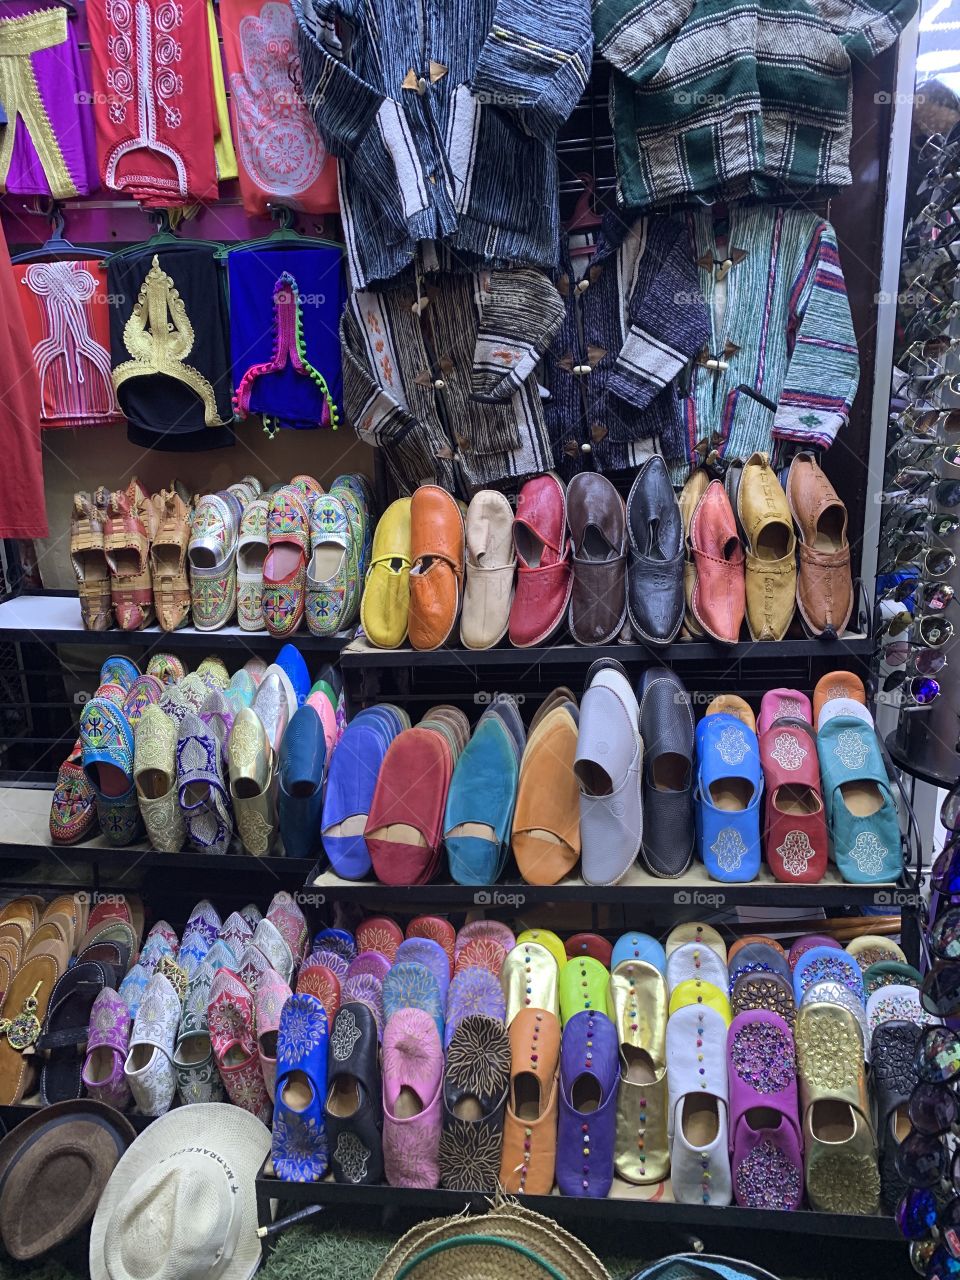 Shoes in the market place